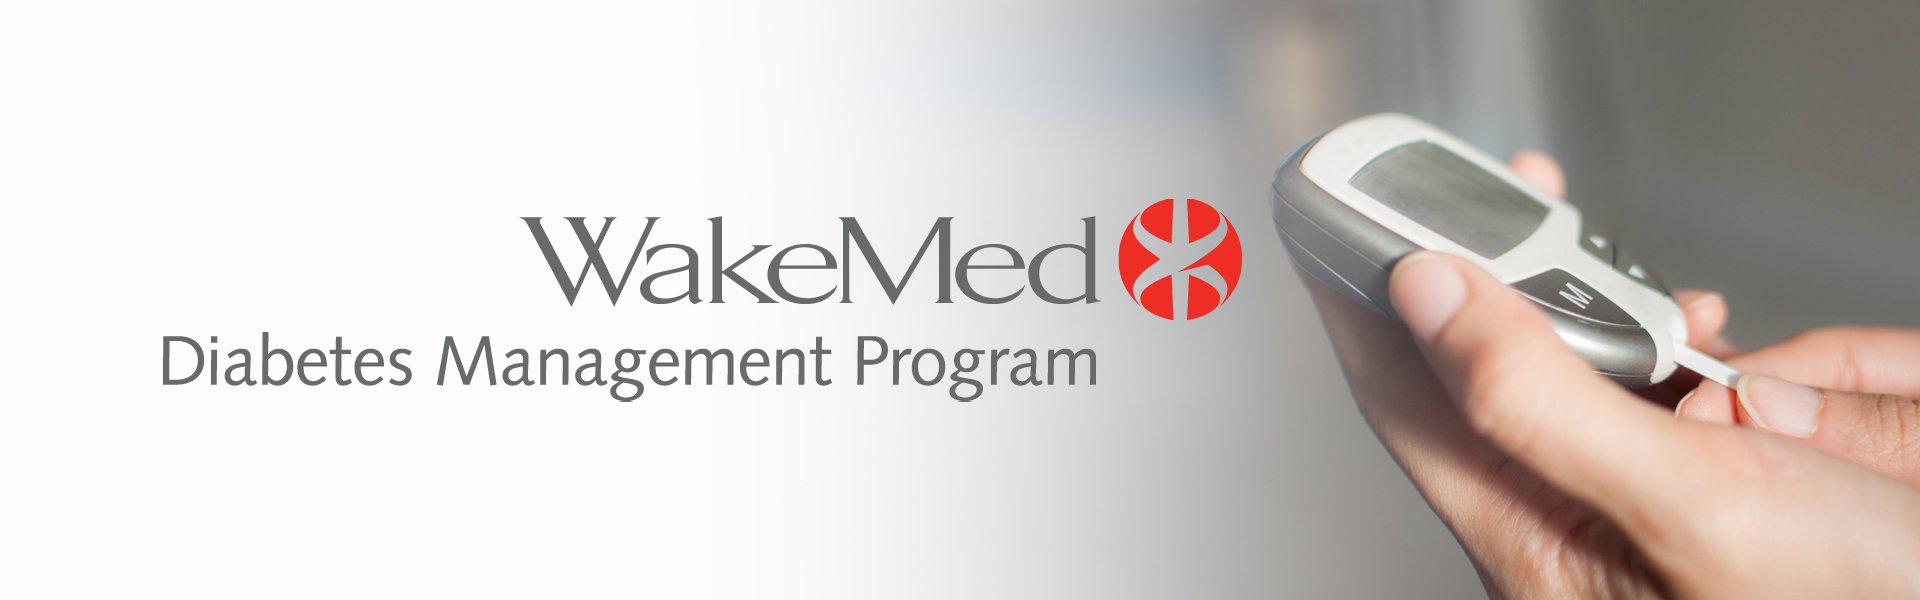 Diabetes Management, WakeMed Health & Hospitals, Raleigh ...